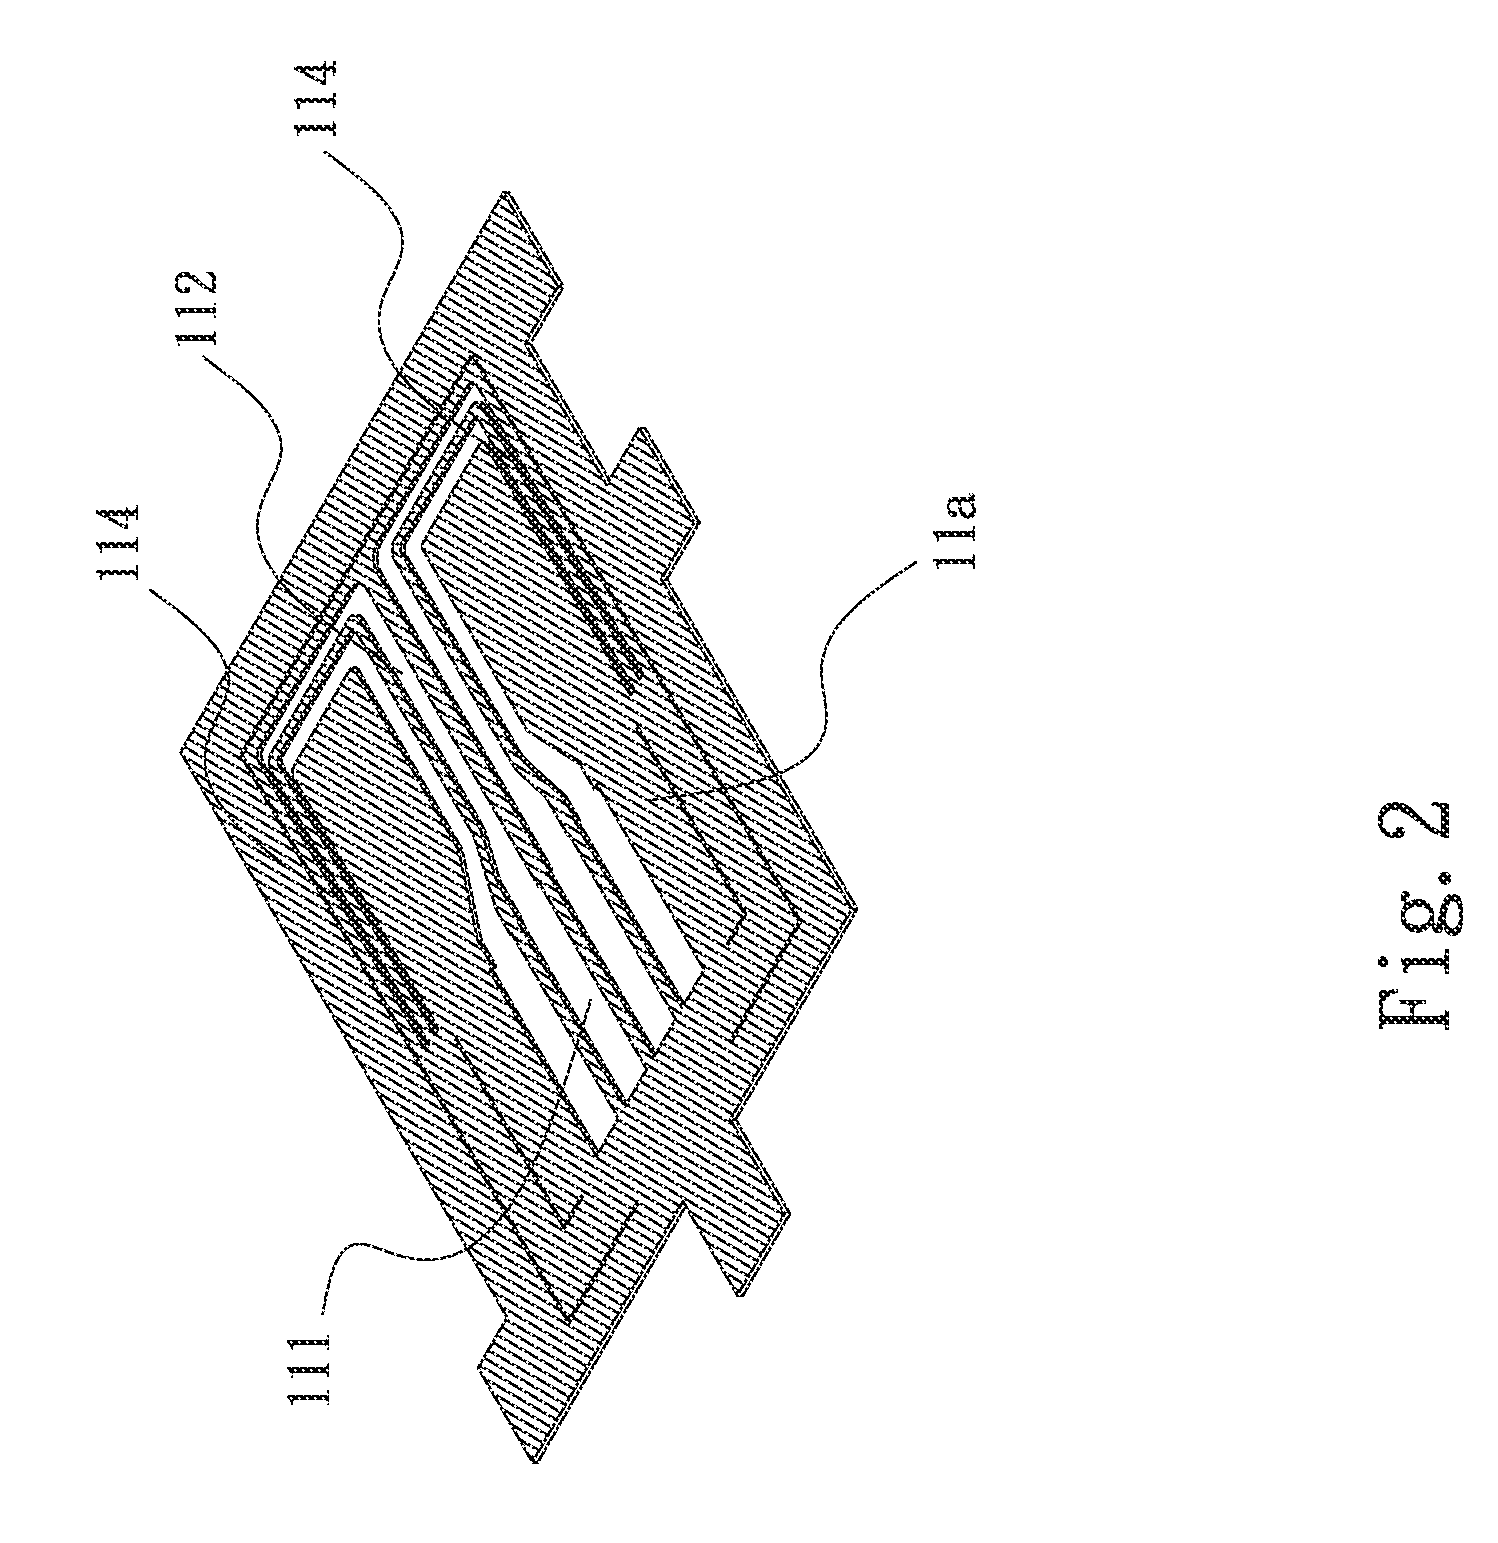 Heat dissipation structure